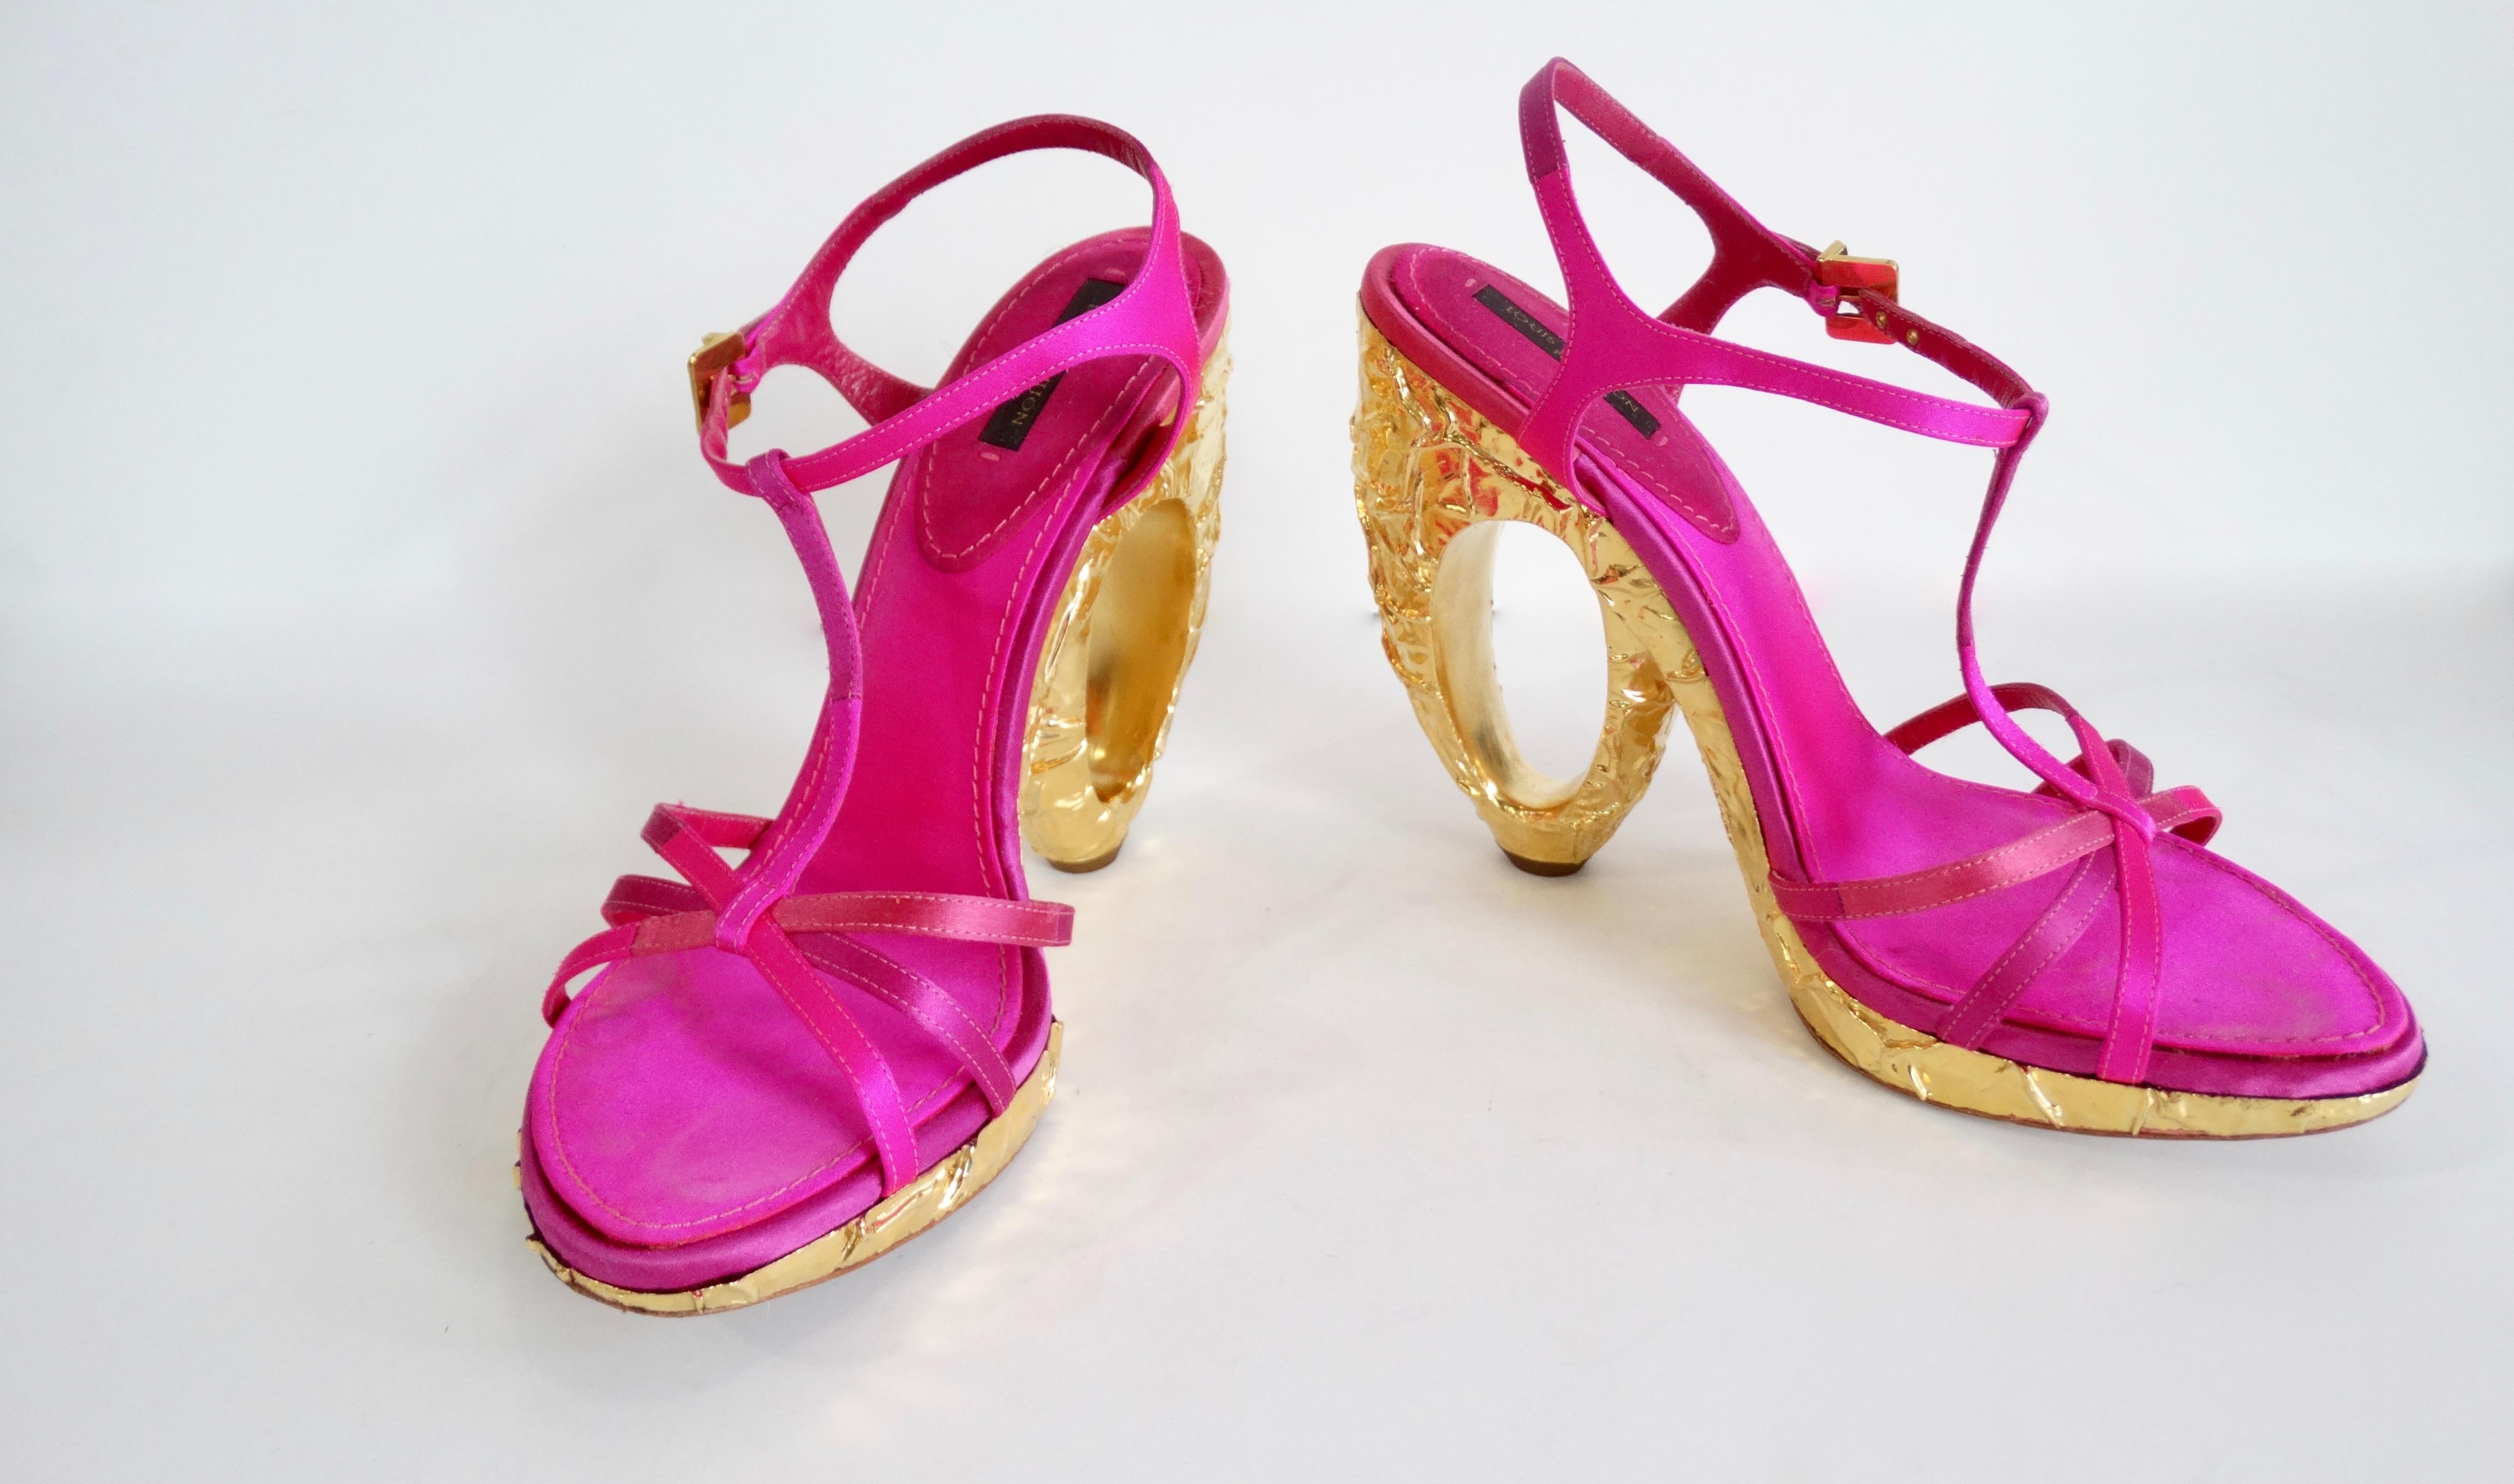 Louis Vuitton 2000s Fuchsia Satin Pumps With Textured Gold Heels For Sale 2